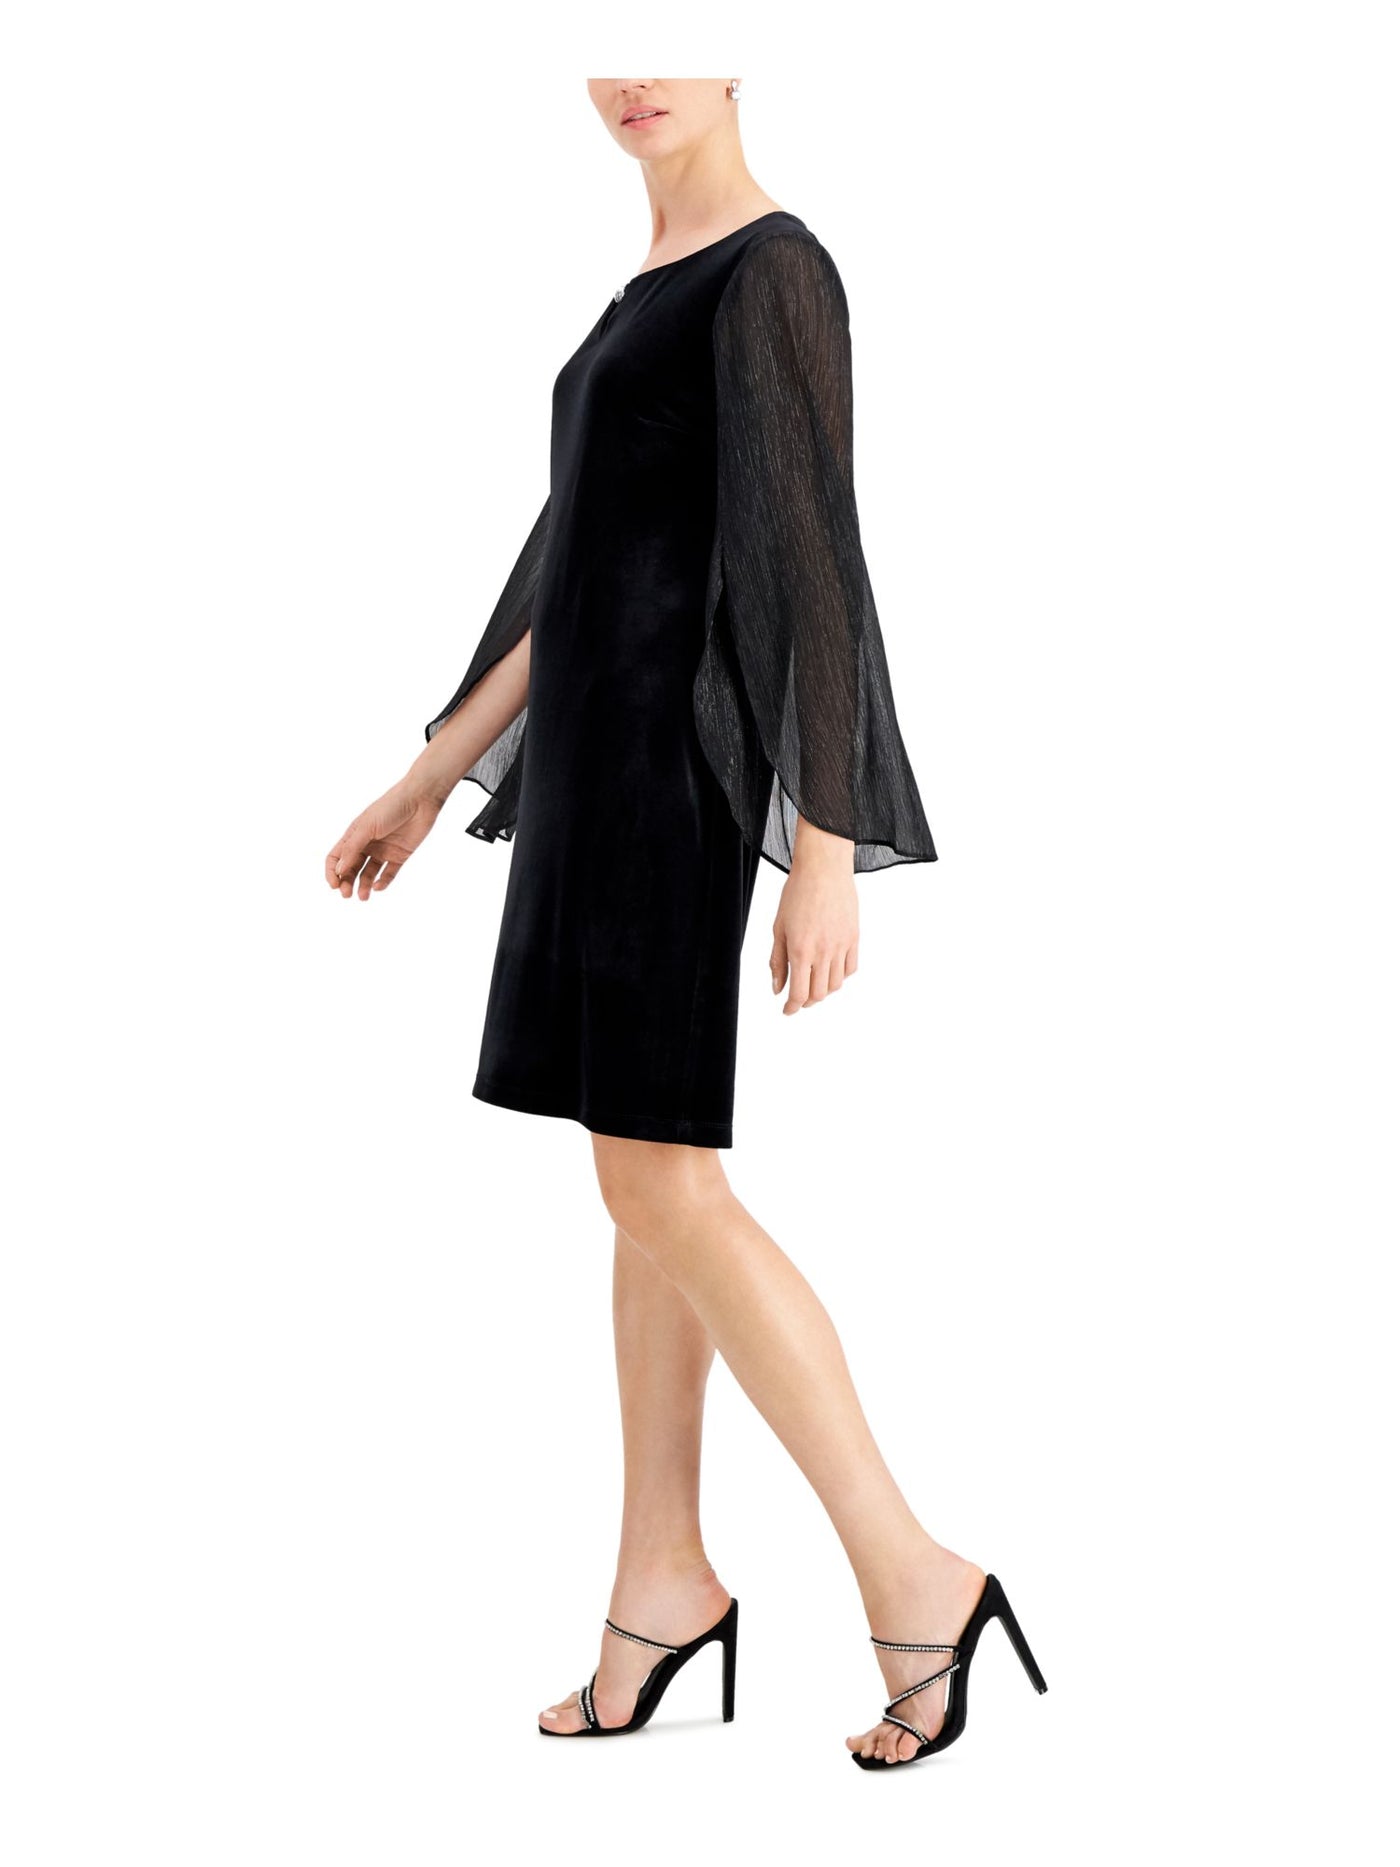 CONNECTED APPAREL Womens Black Stretch Embellished Long Angel Sleeves Keyhole Above The Knee Cocktail Sheath Dress 14